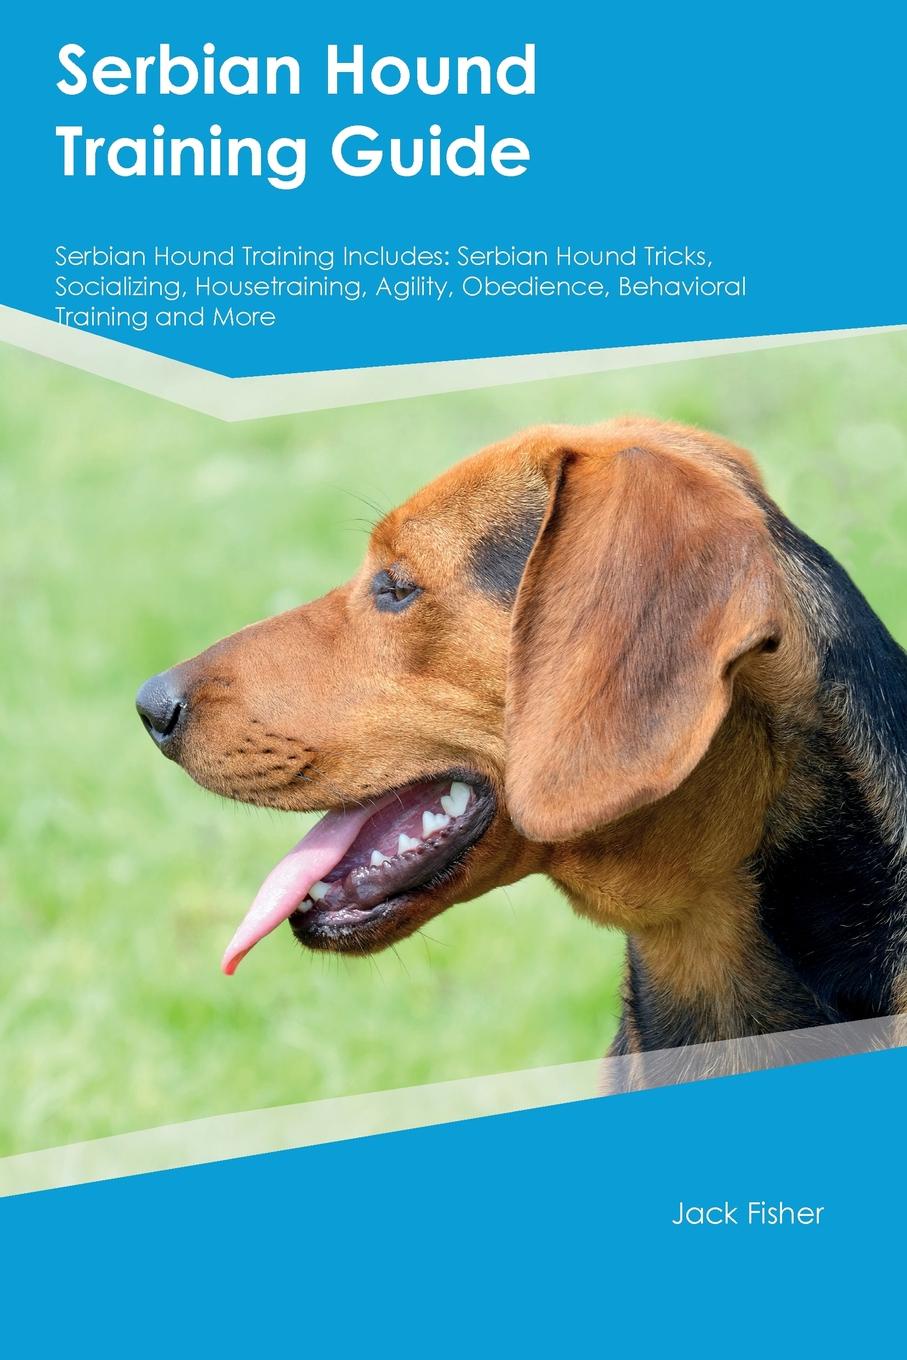 Serbian Hound Training Guide Serbian Hound Training Includes. Serbian Hound Tricks, Socializing, Housetraining, Agility, Obedience, Behavioral Training and More